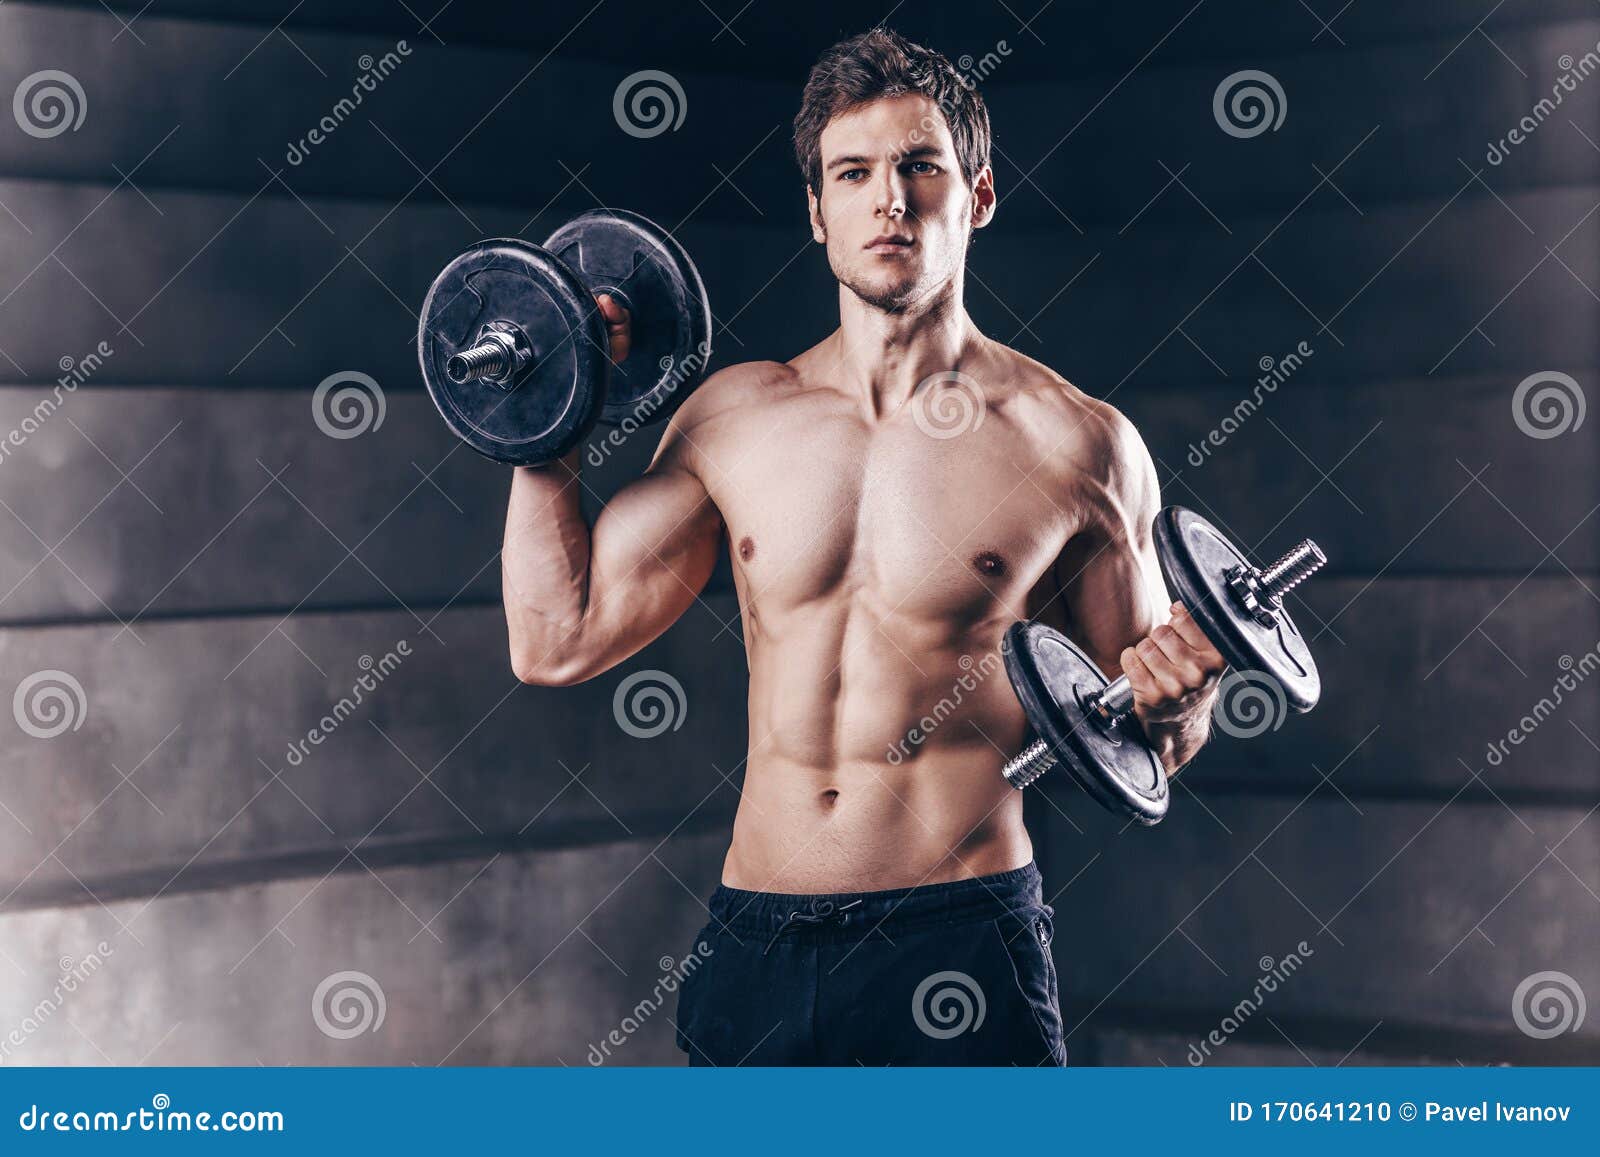 Athletic Man Showing Muscular Body And Doing Exercises 